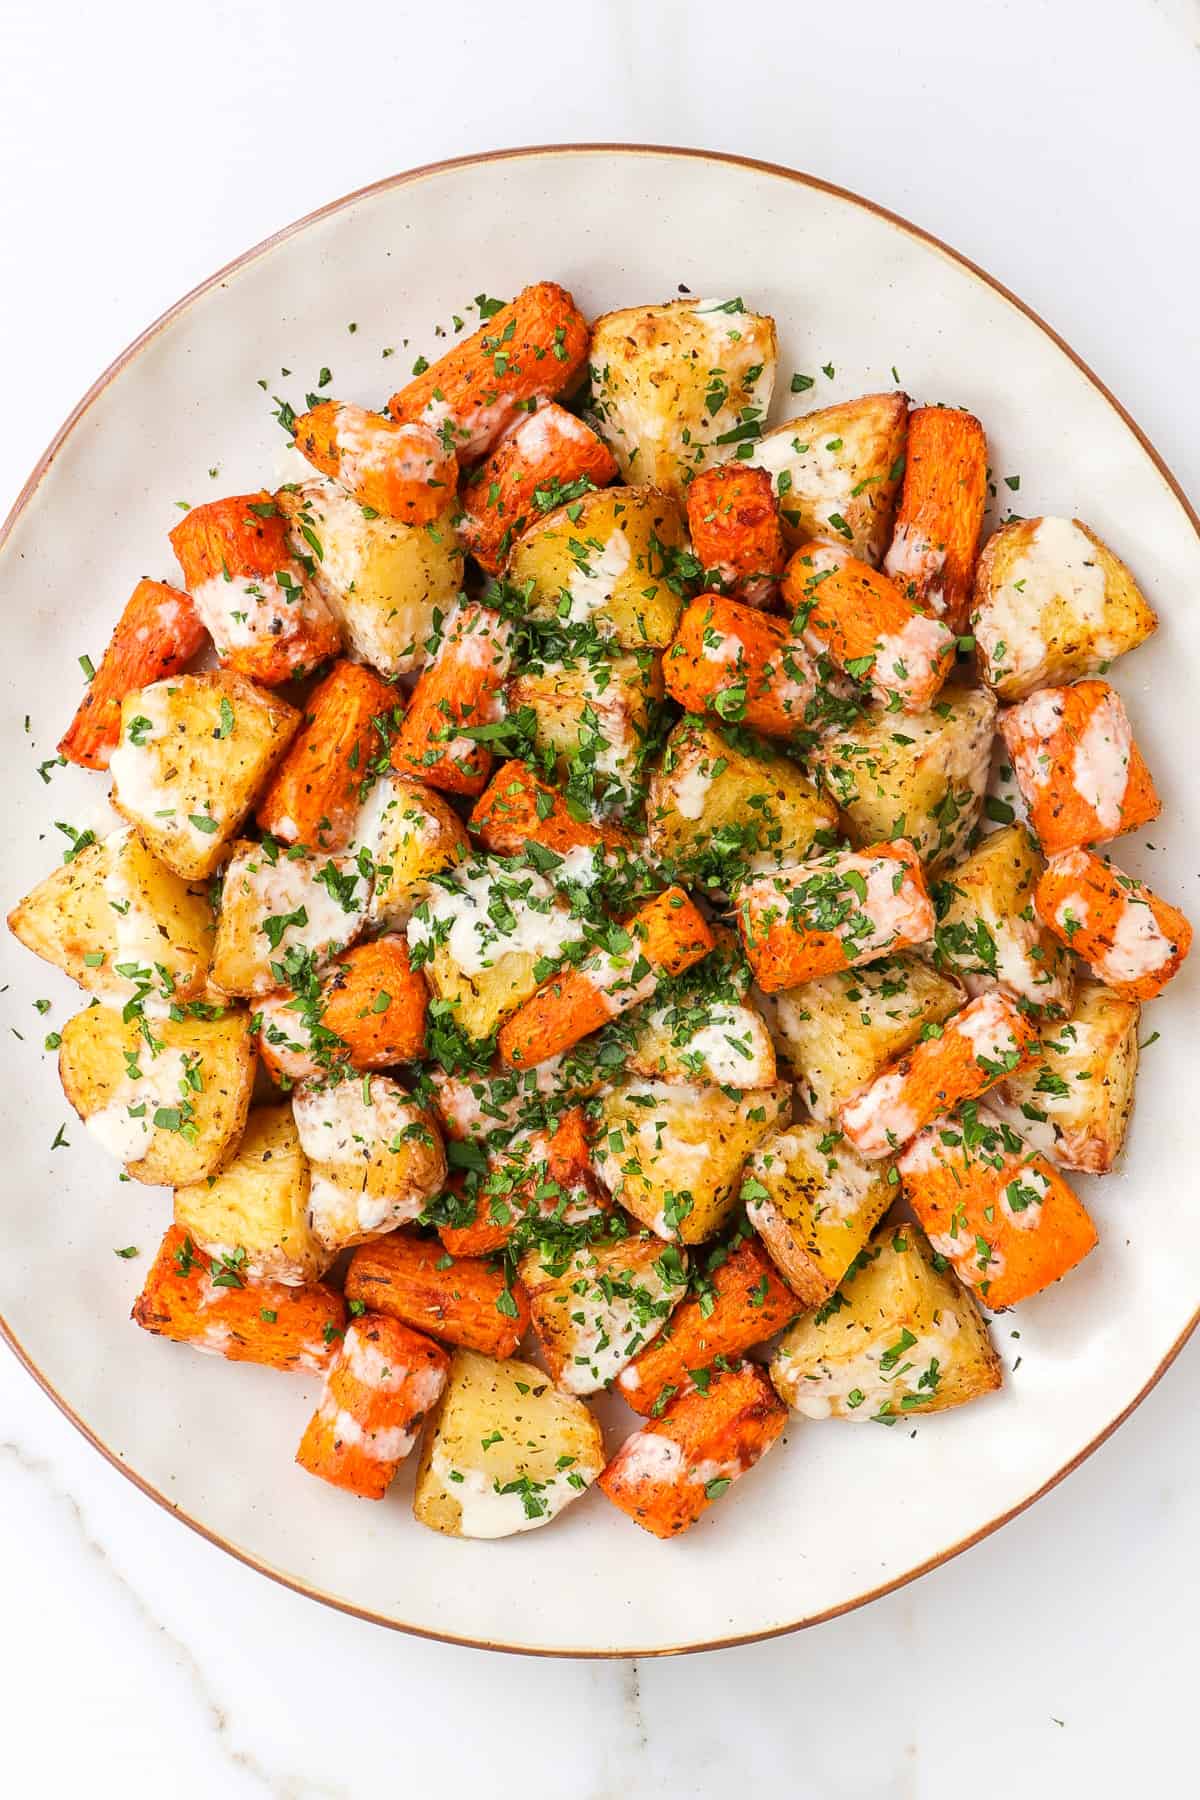 Air fryer carrots and potatoes with tahini and herbs on top.